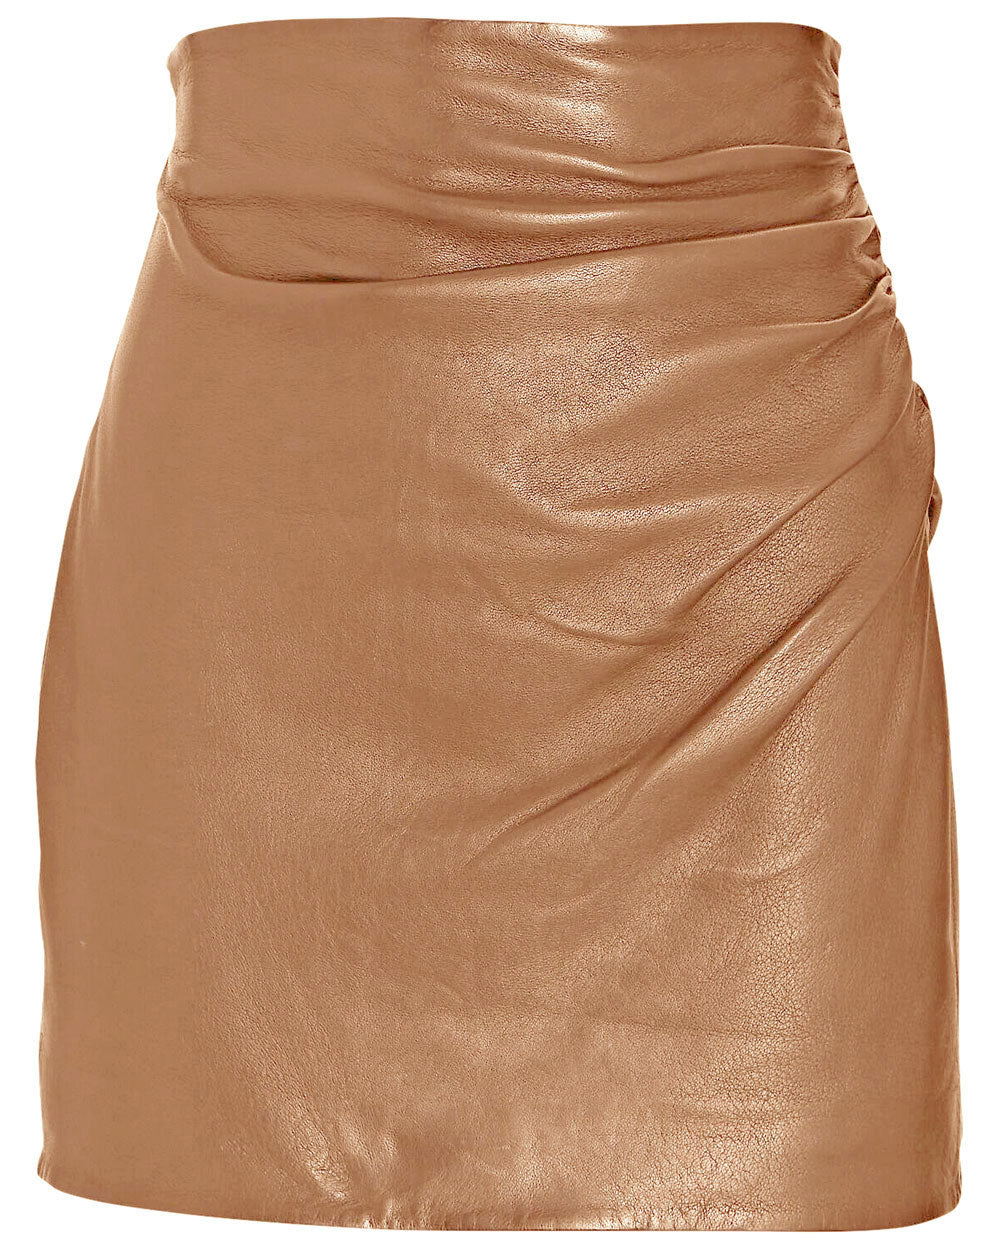 Chestnut Leather Ruched Mini Skirt